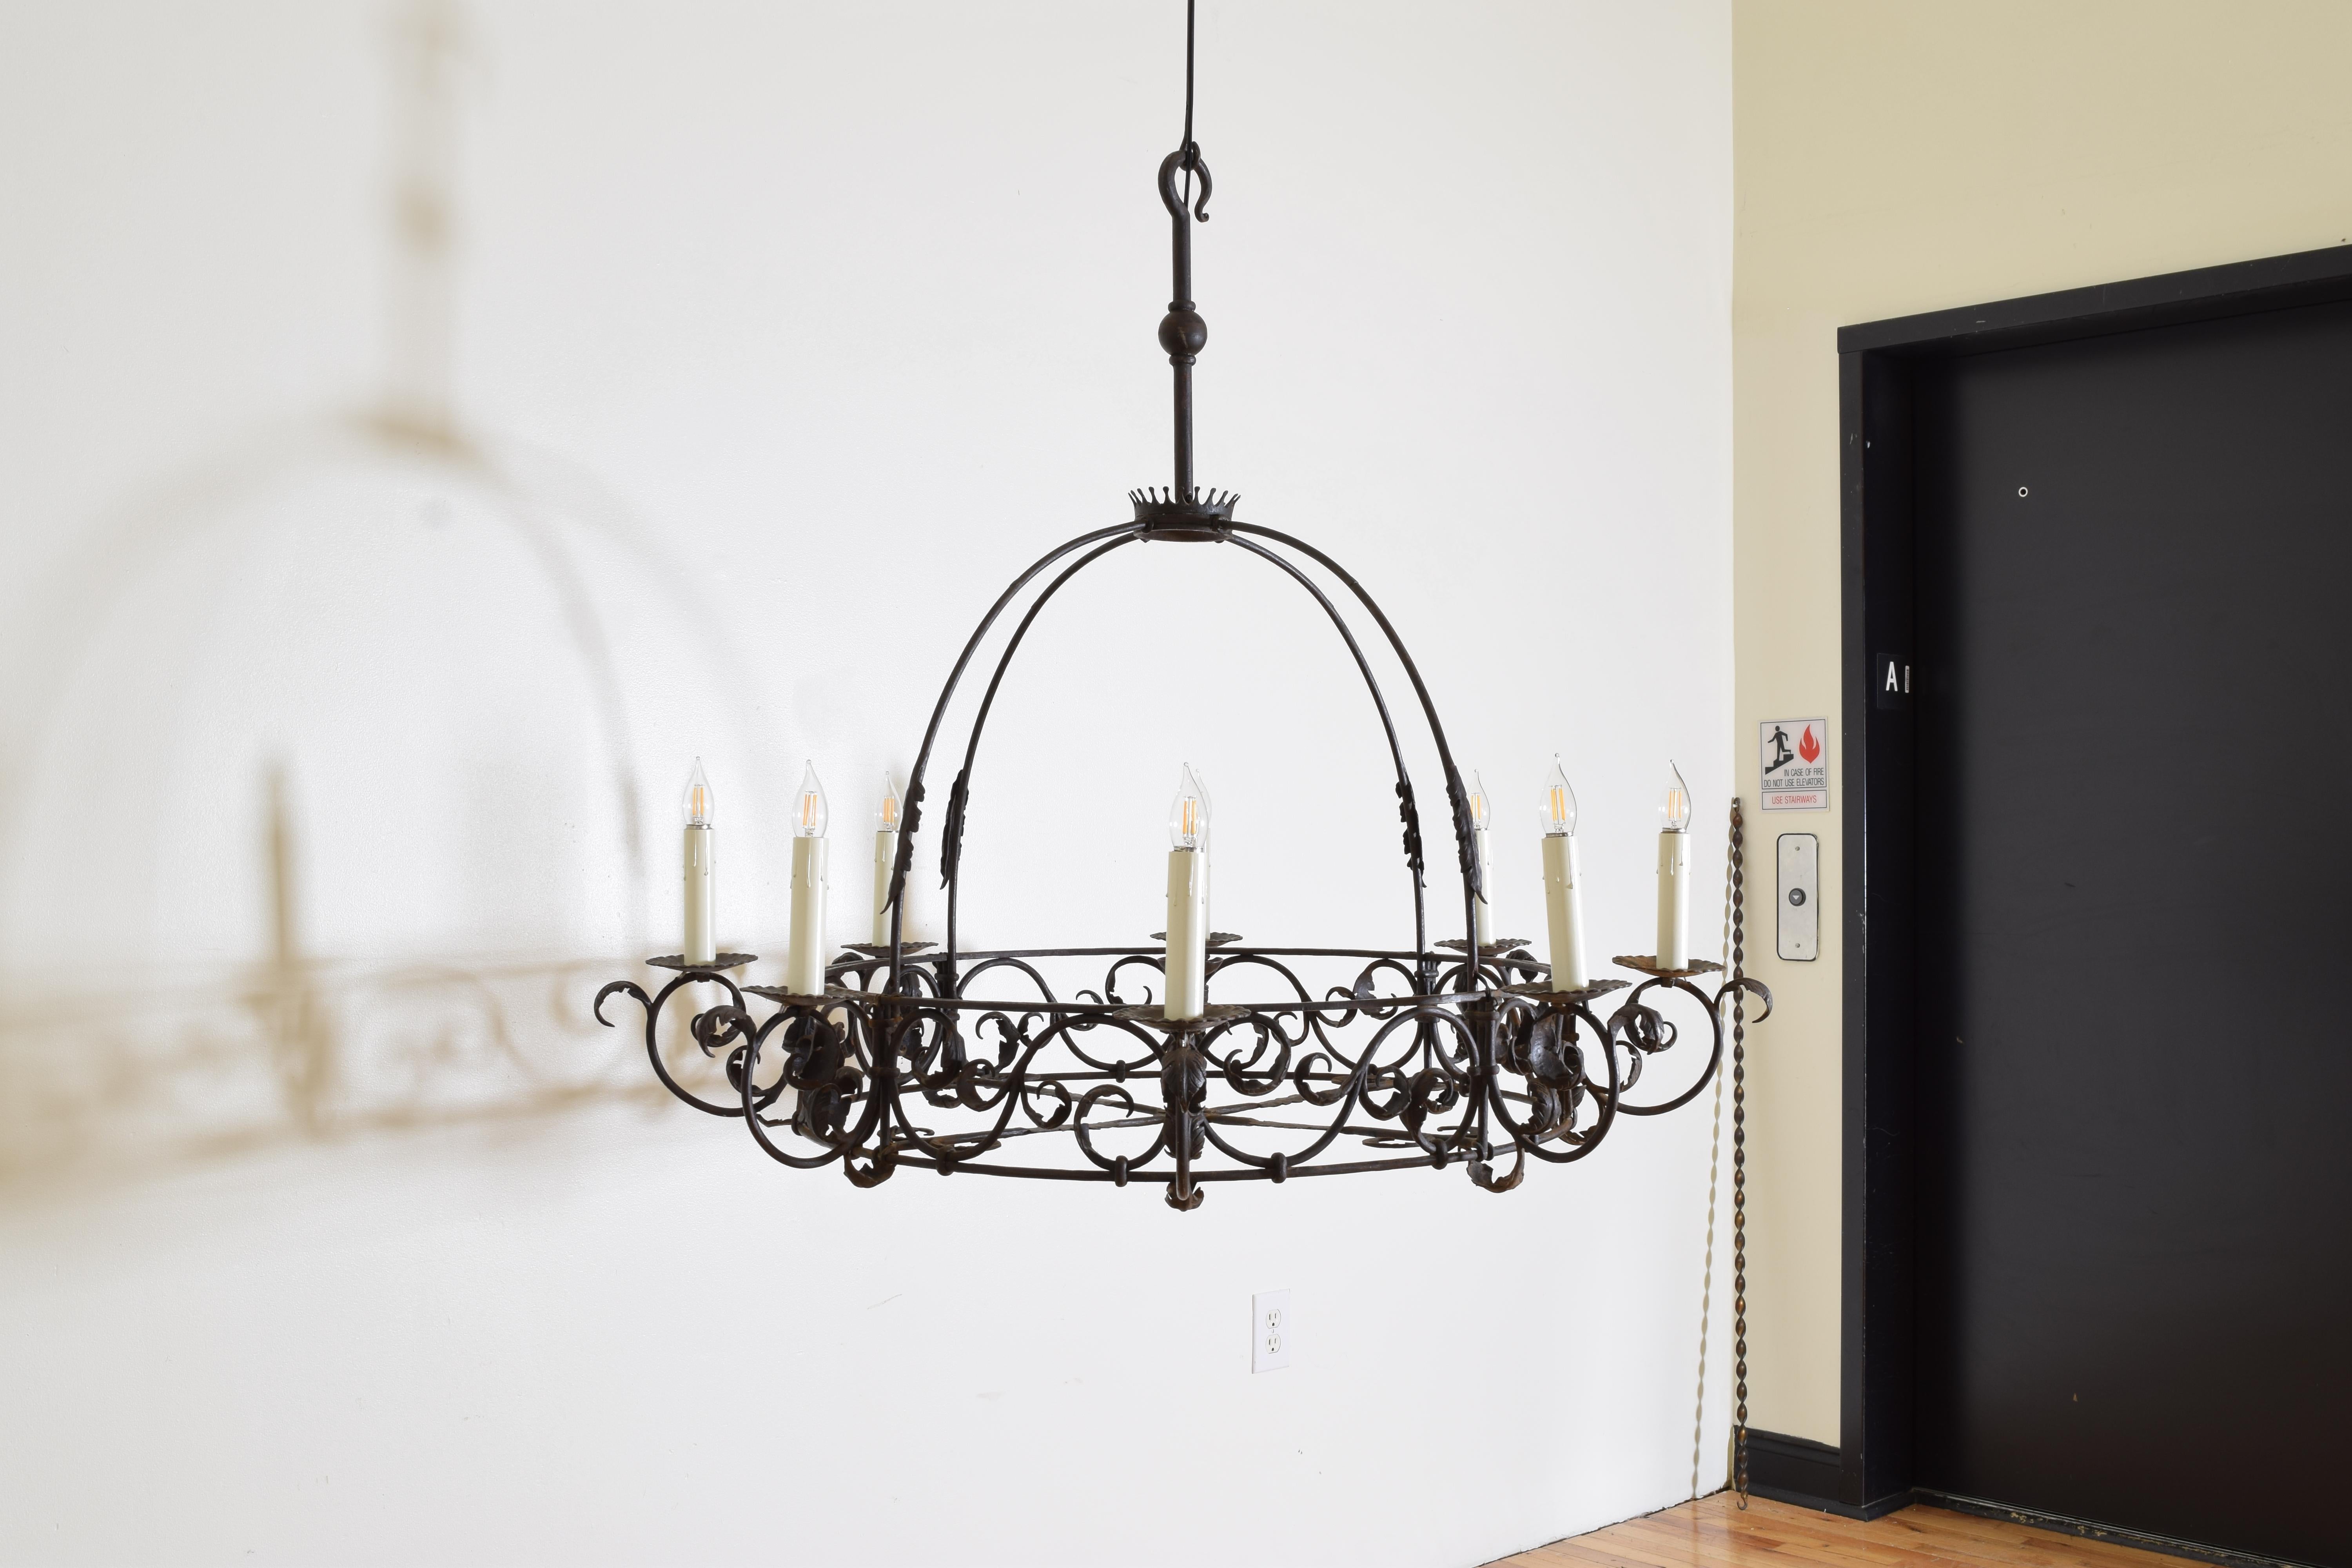 Spanish, Valencia, Wrought Iron 8-Light Dome-Form Chandelier, Early 20th Century For Sale 1